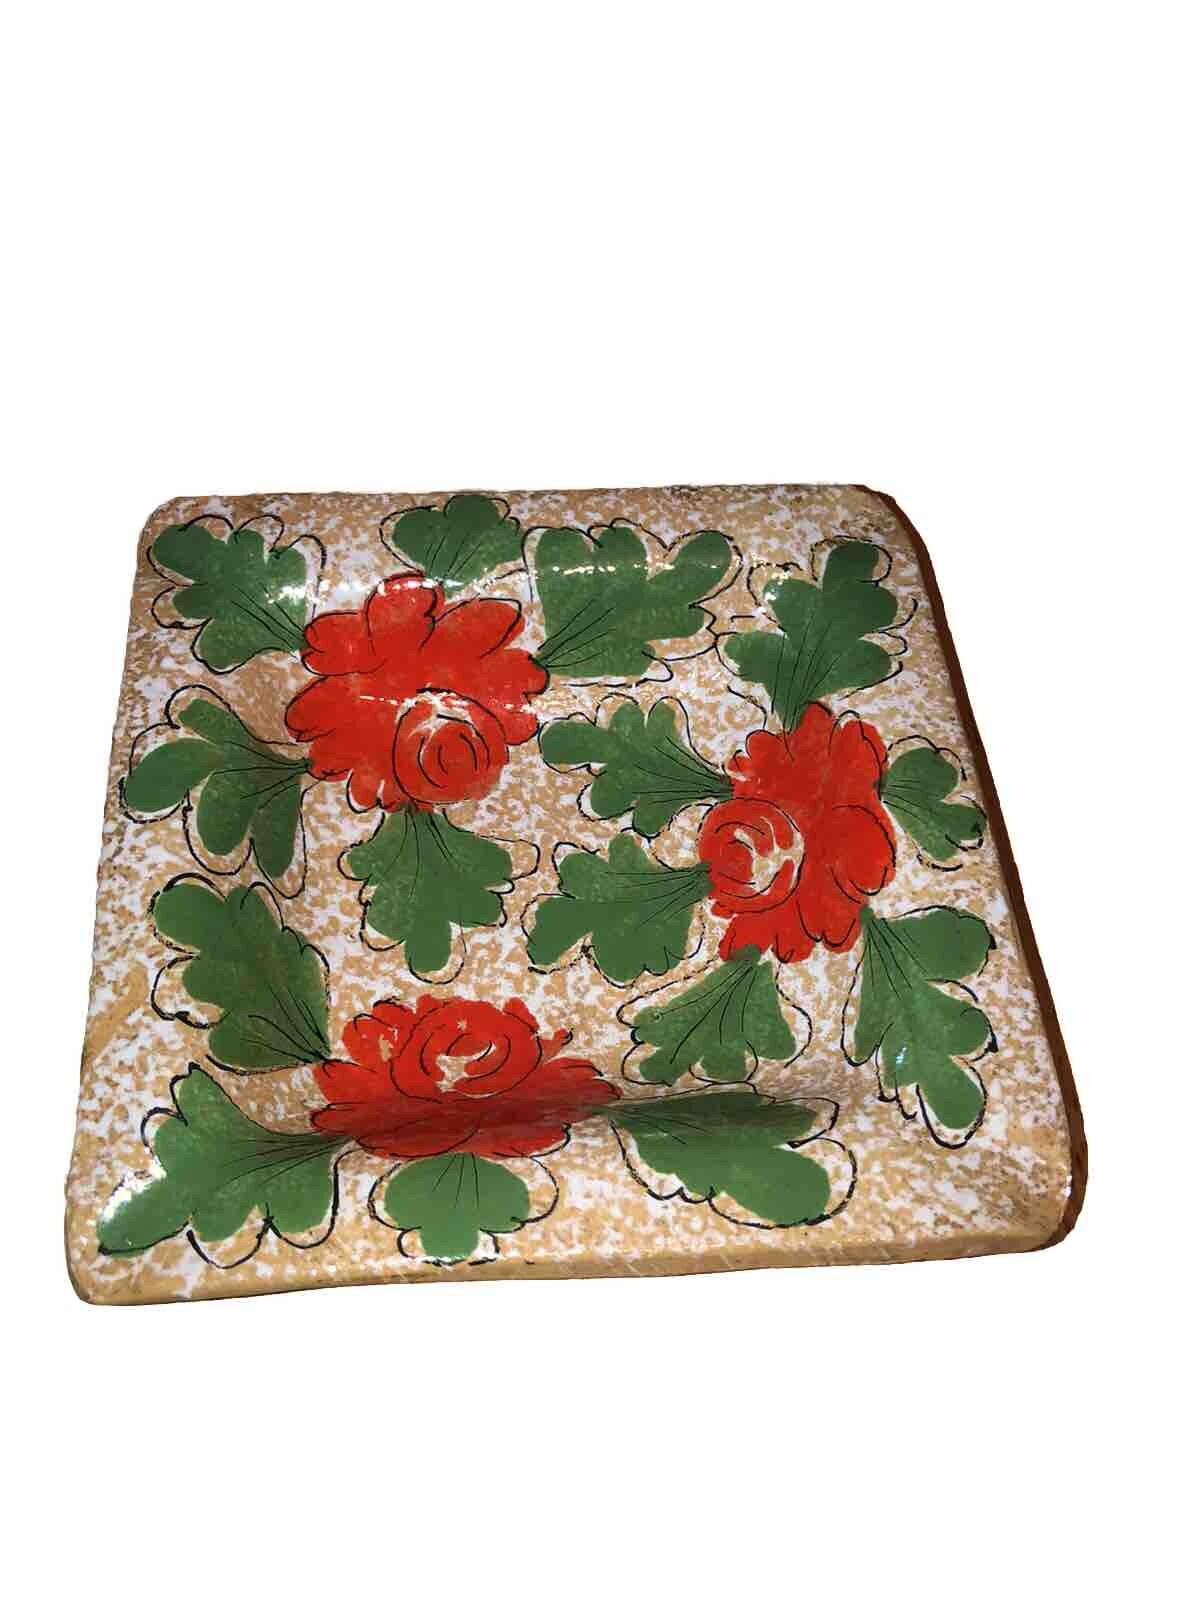 VINTAGE MCM Italy Terra-Cotta Bowl Dish Ashtray Bright Red Flowers ￼cute